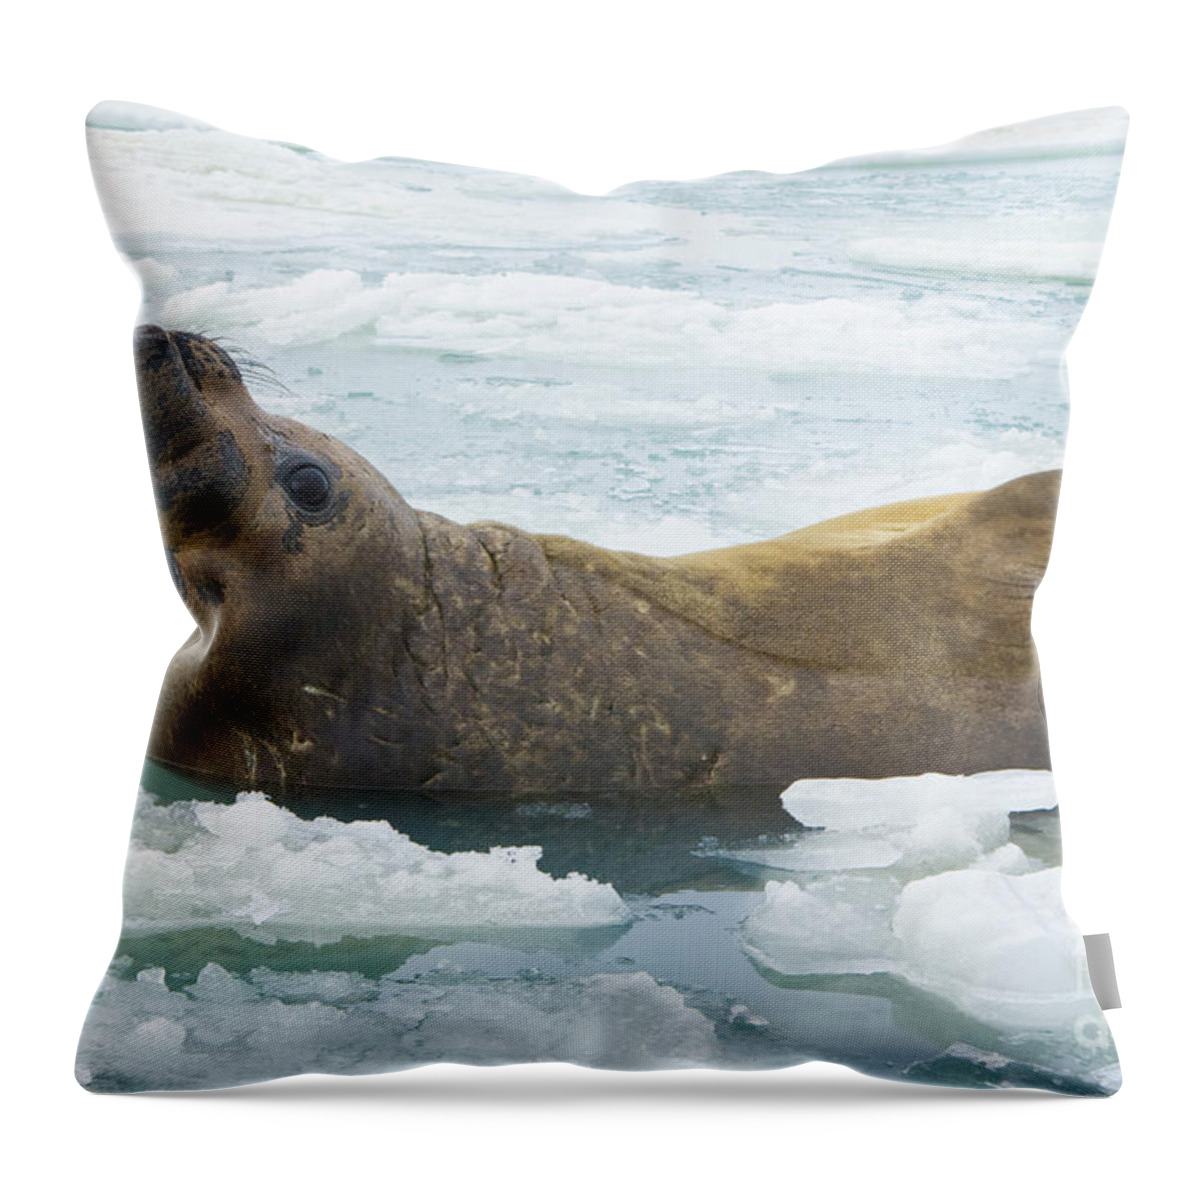 00345893 Throw Pillow featuring the photograph Southern Elephant Seal Reclining by Yva Momatiuk John Eastcott